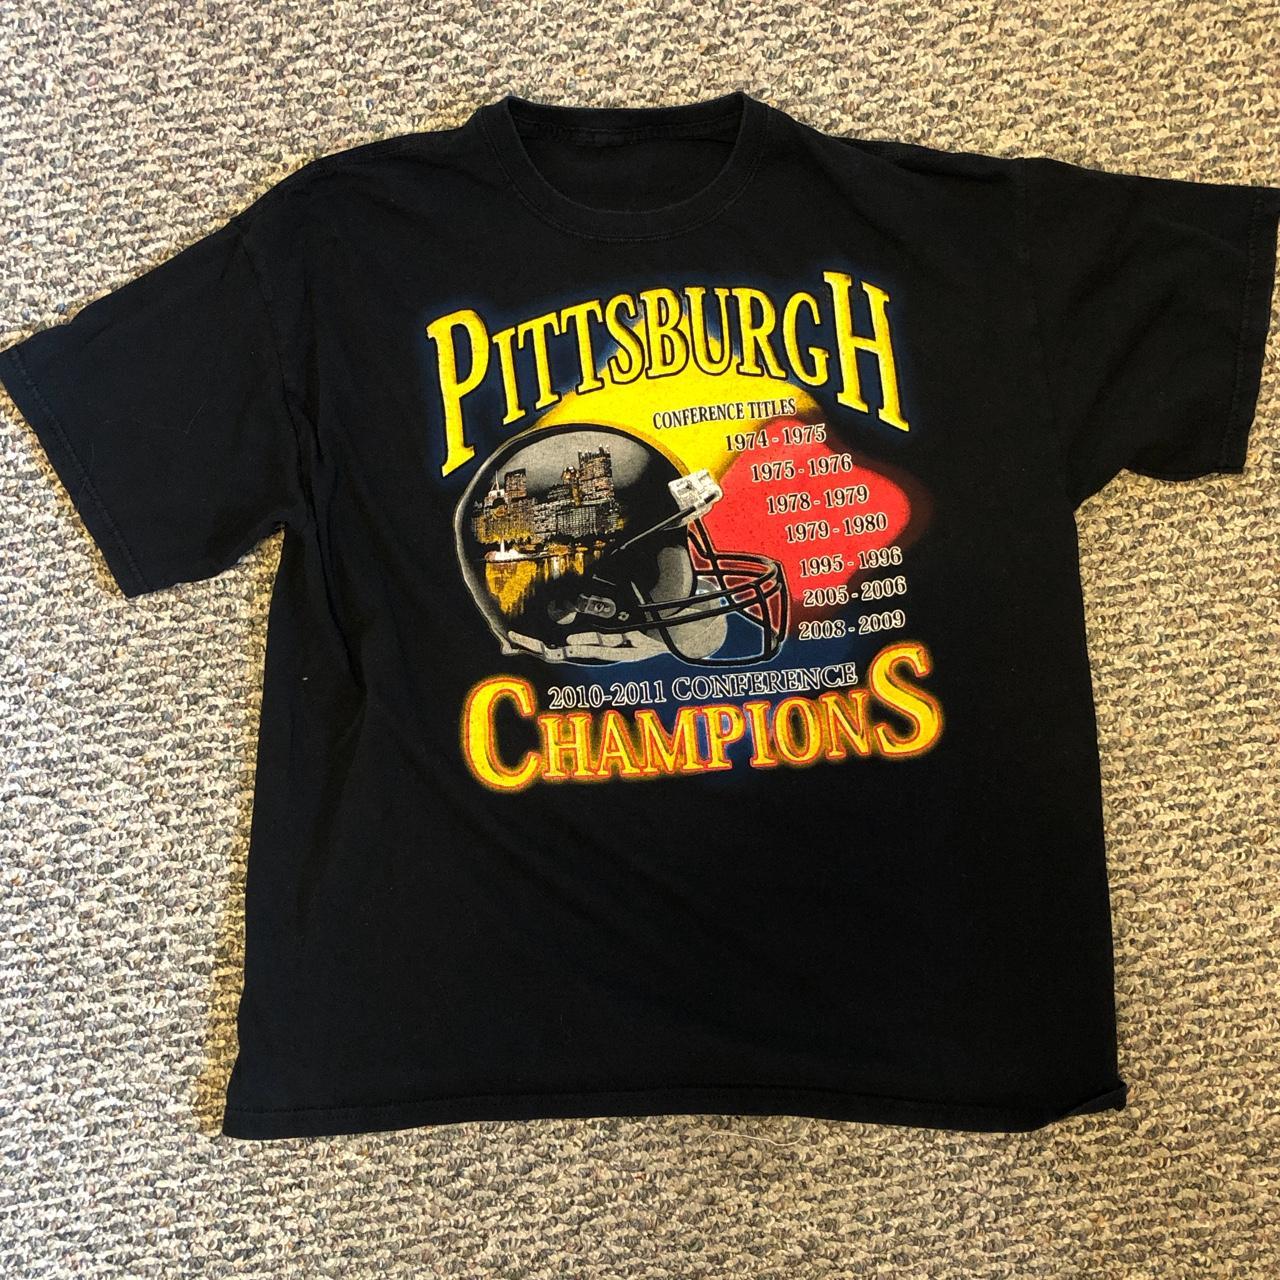 Pittsburgh Steelers Tshirt Women Size XL 2008 Conference Champs